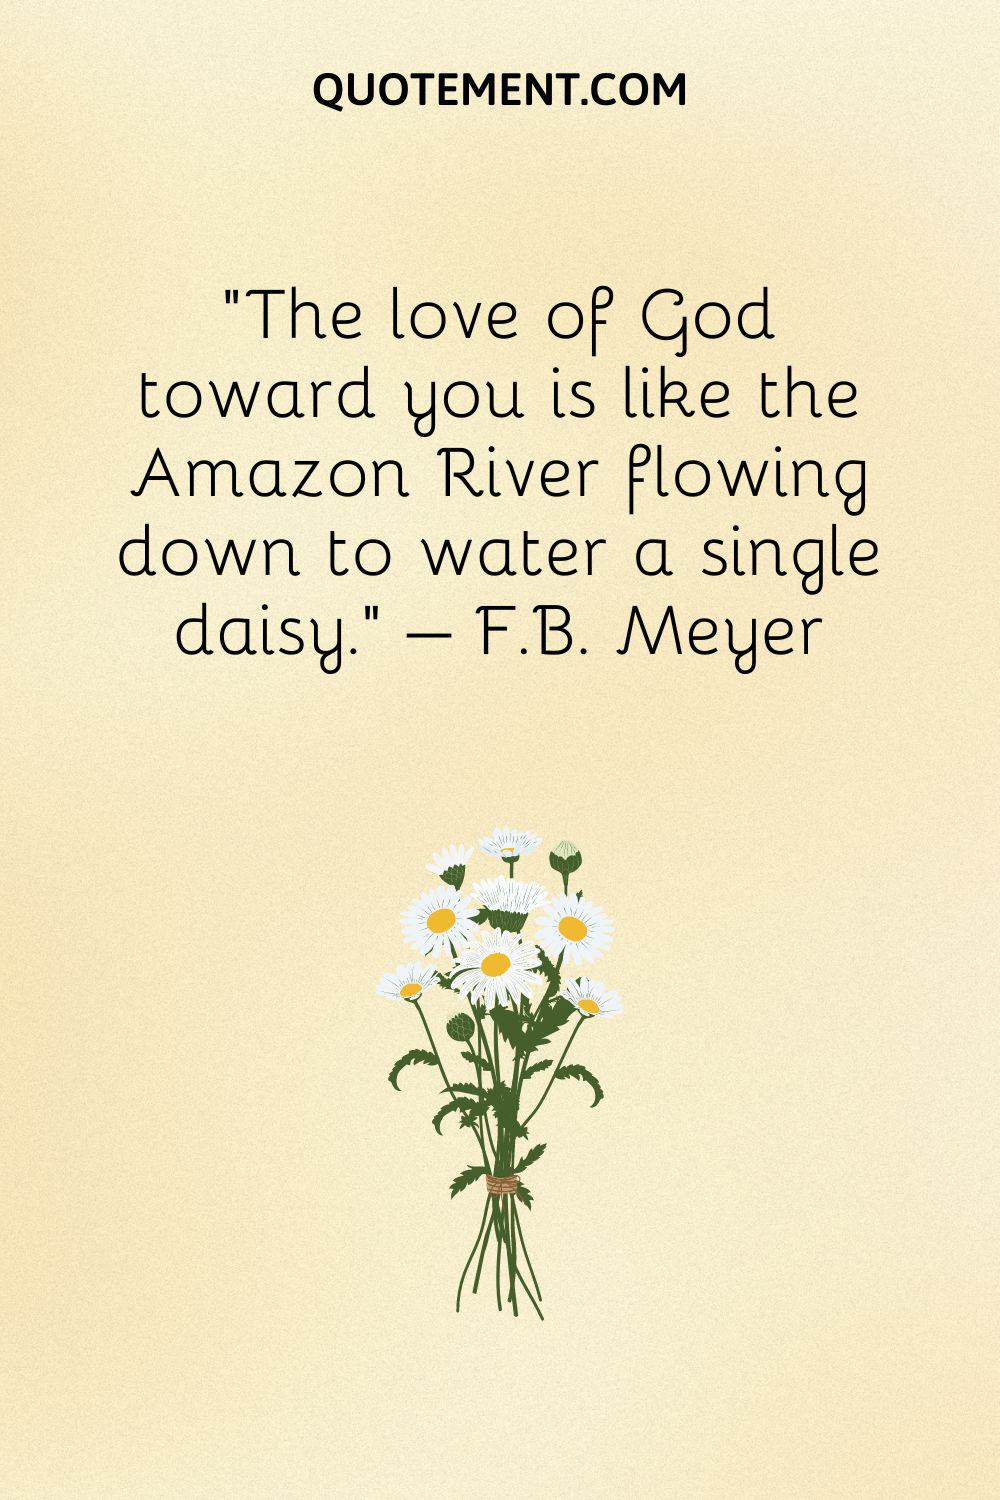 The love of God toward you is like the Amazon River flowing down to water a single daisy